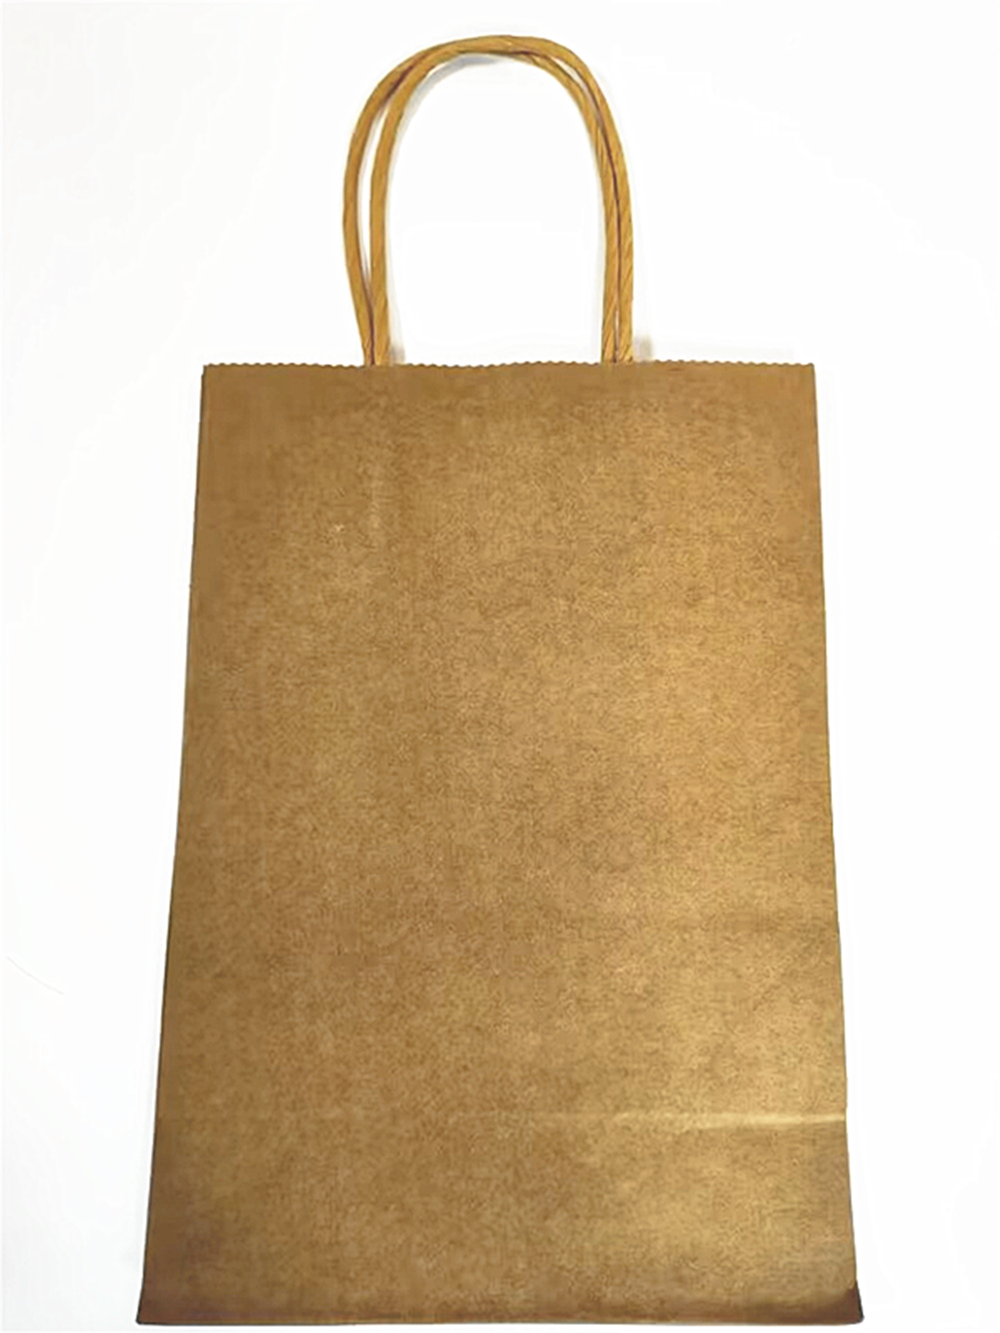 AIFANSS Paper Bags Gift Bags Medium Size, Brown Paper Bags with Handles Bulk Wedding Party Favor Bags, Kraft Bags, Grocery Shopping Bags, Retail Merchandise Bags Gift Sacks 50Pcs